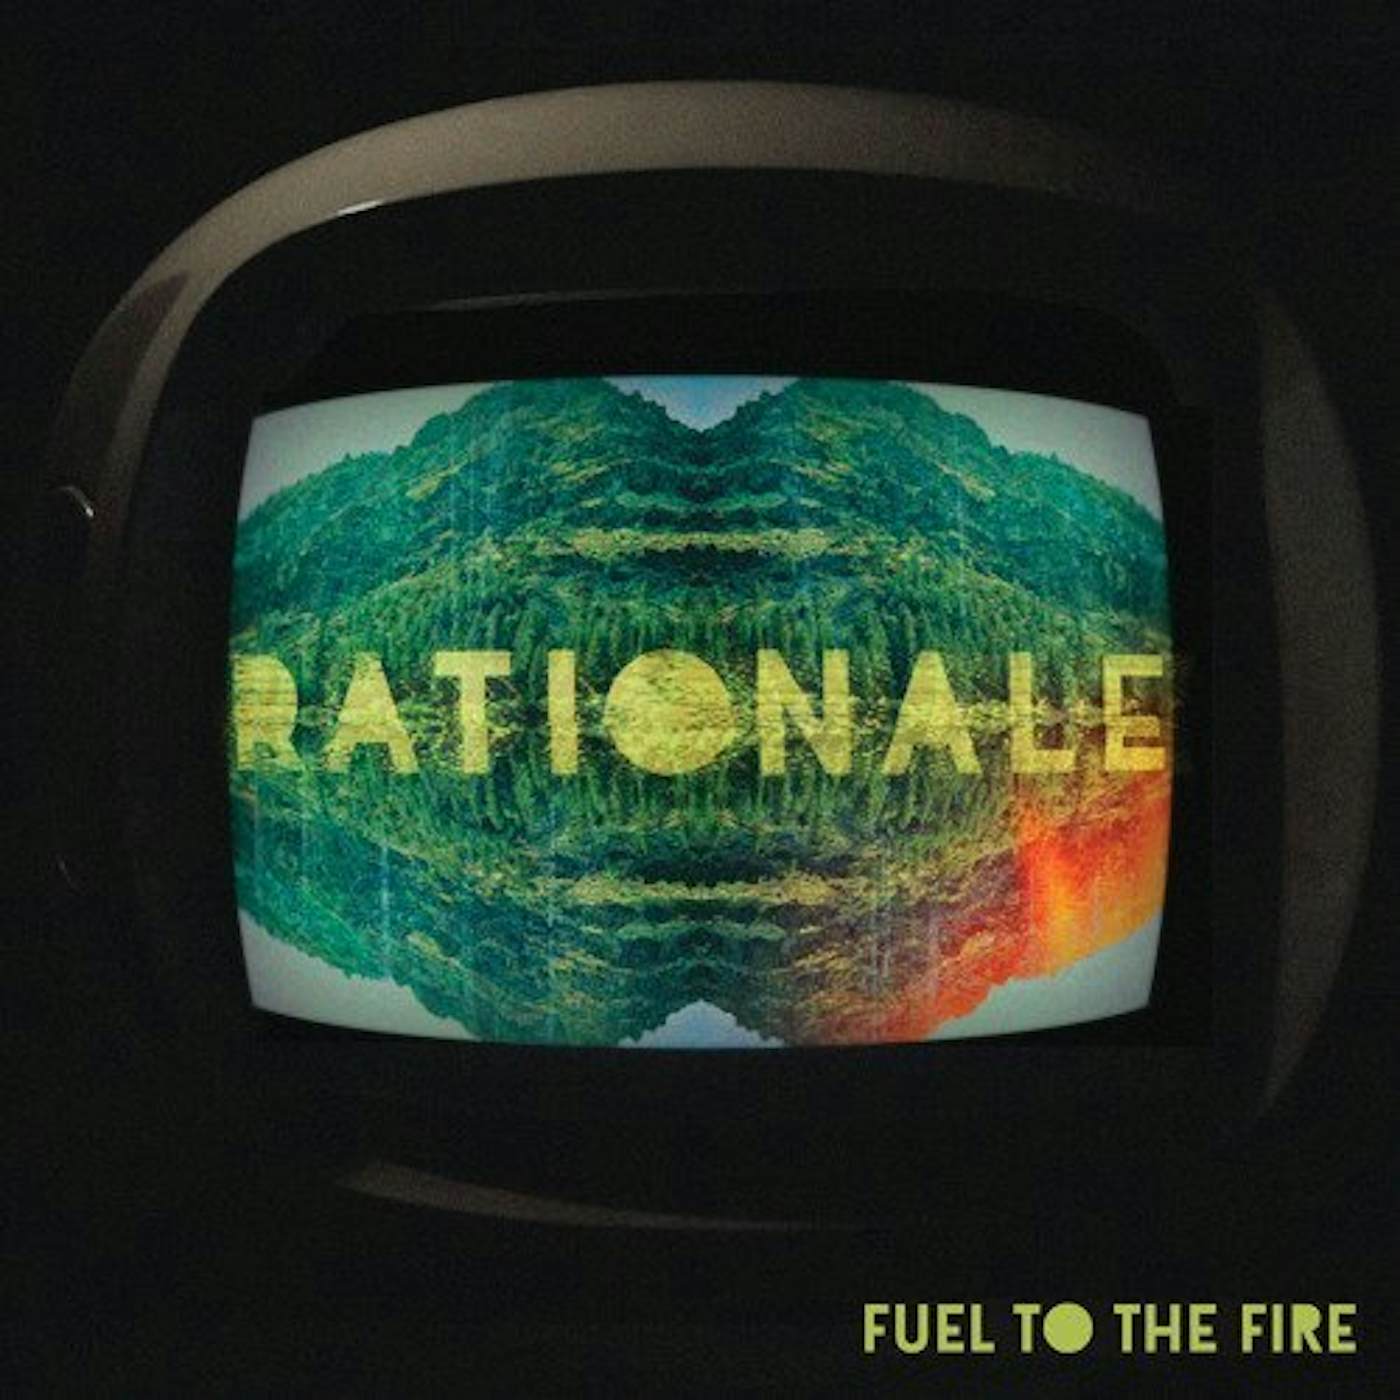 Rationale Fuel To The Fire Vinyl Record